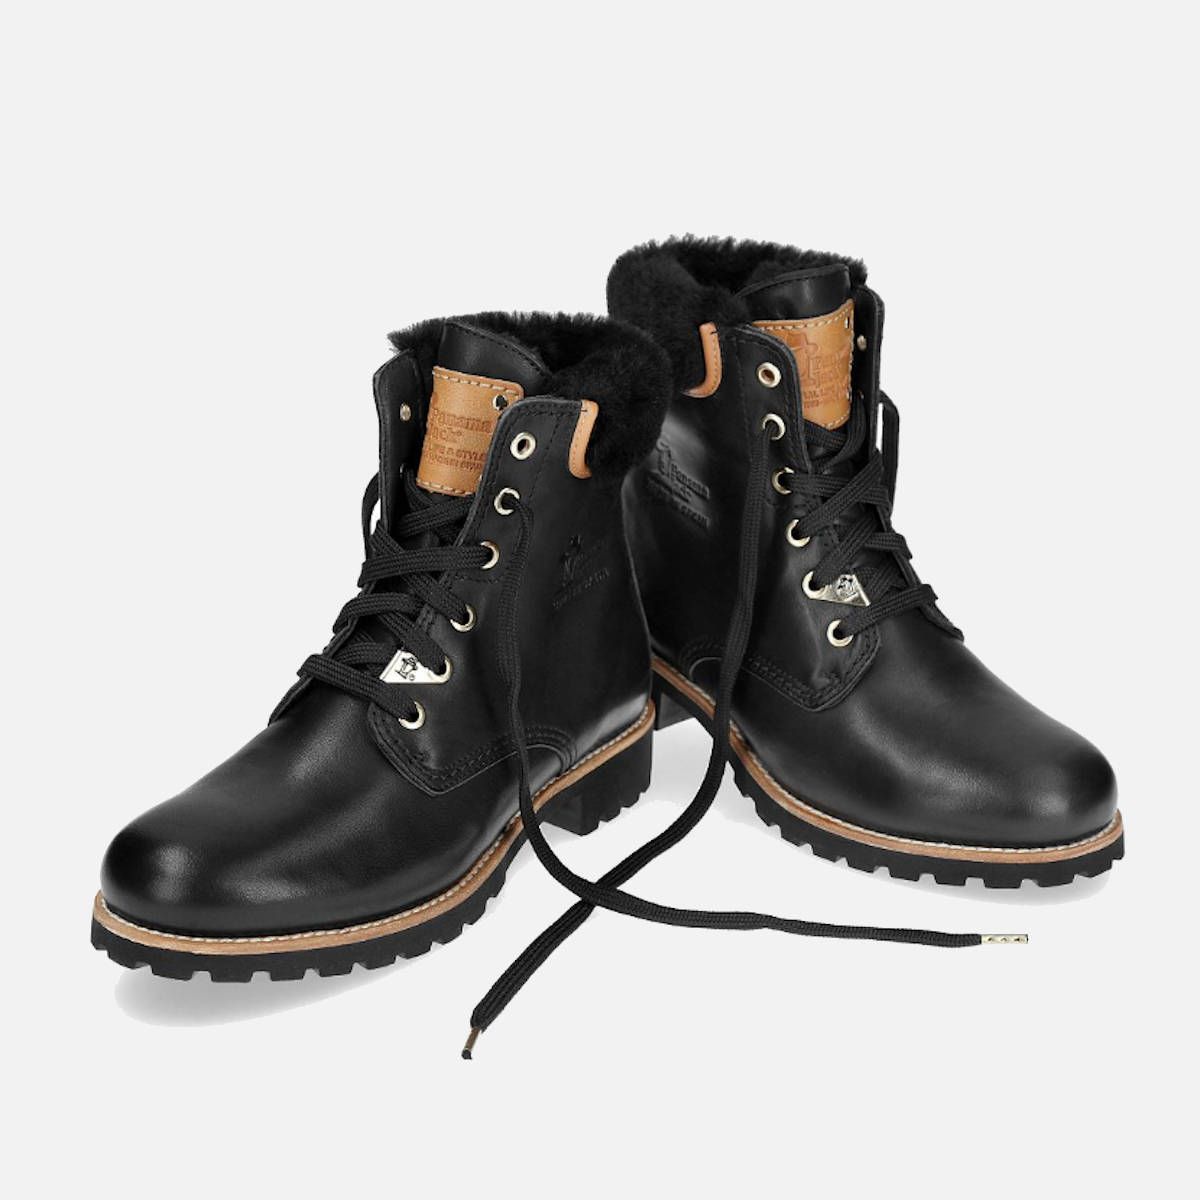 Panama Jack 03 Igloo Travelling Boots in Black Leather